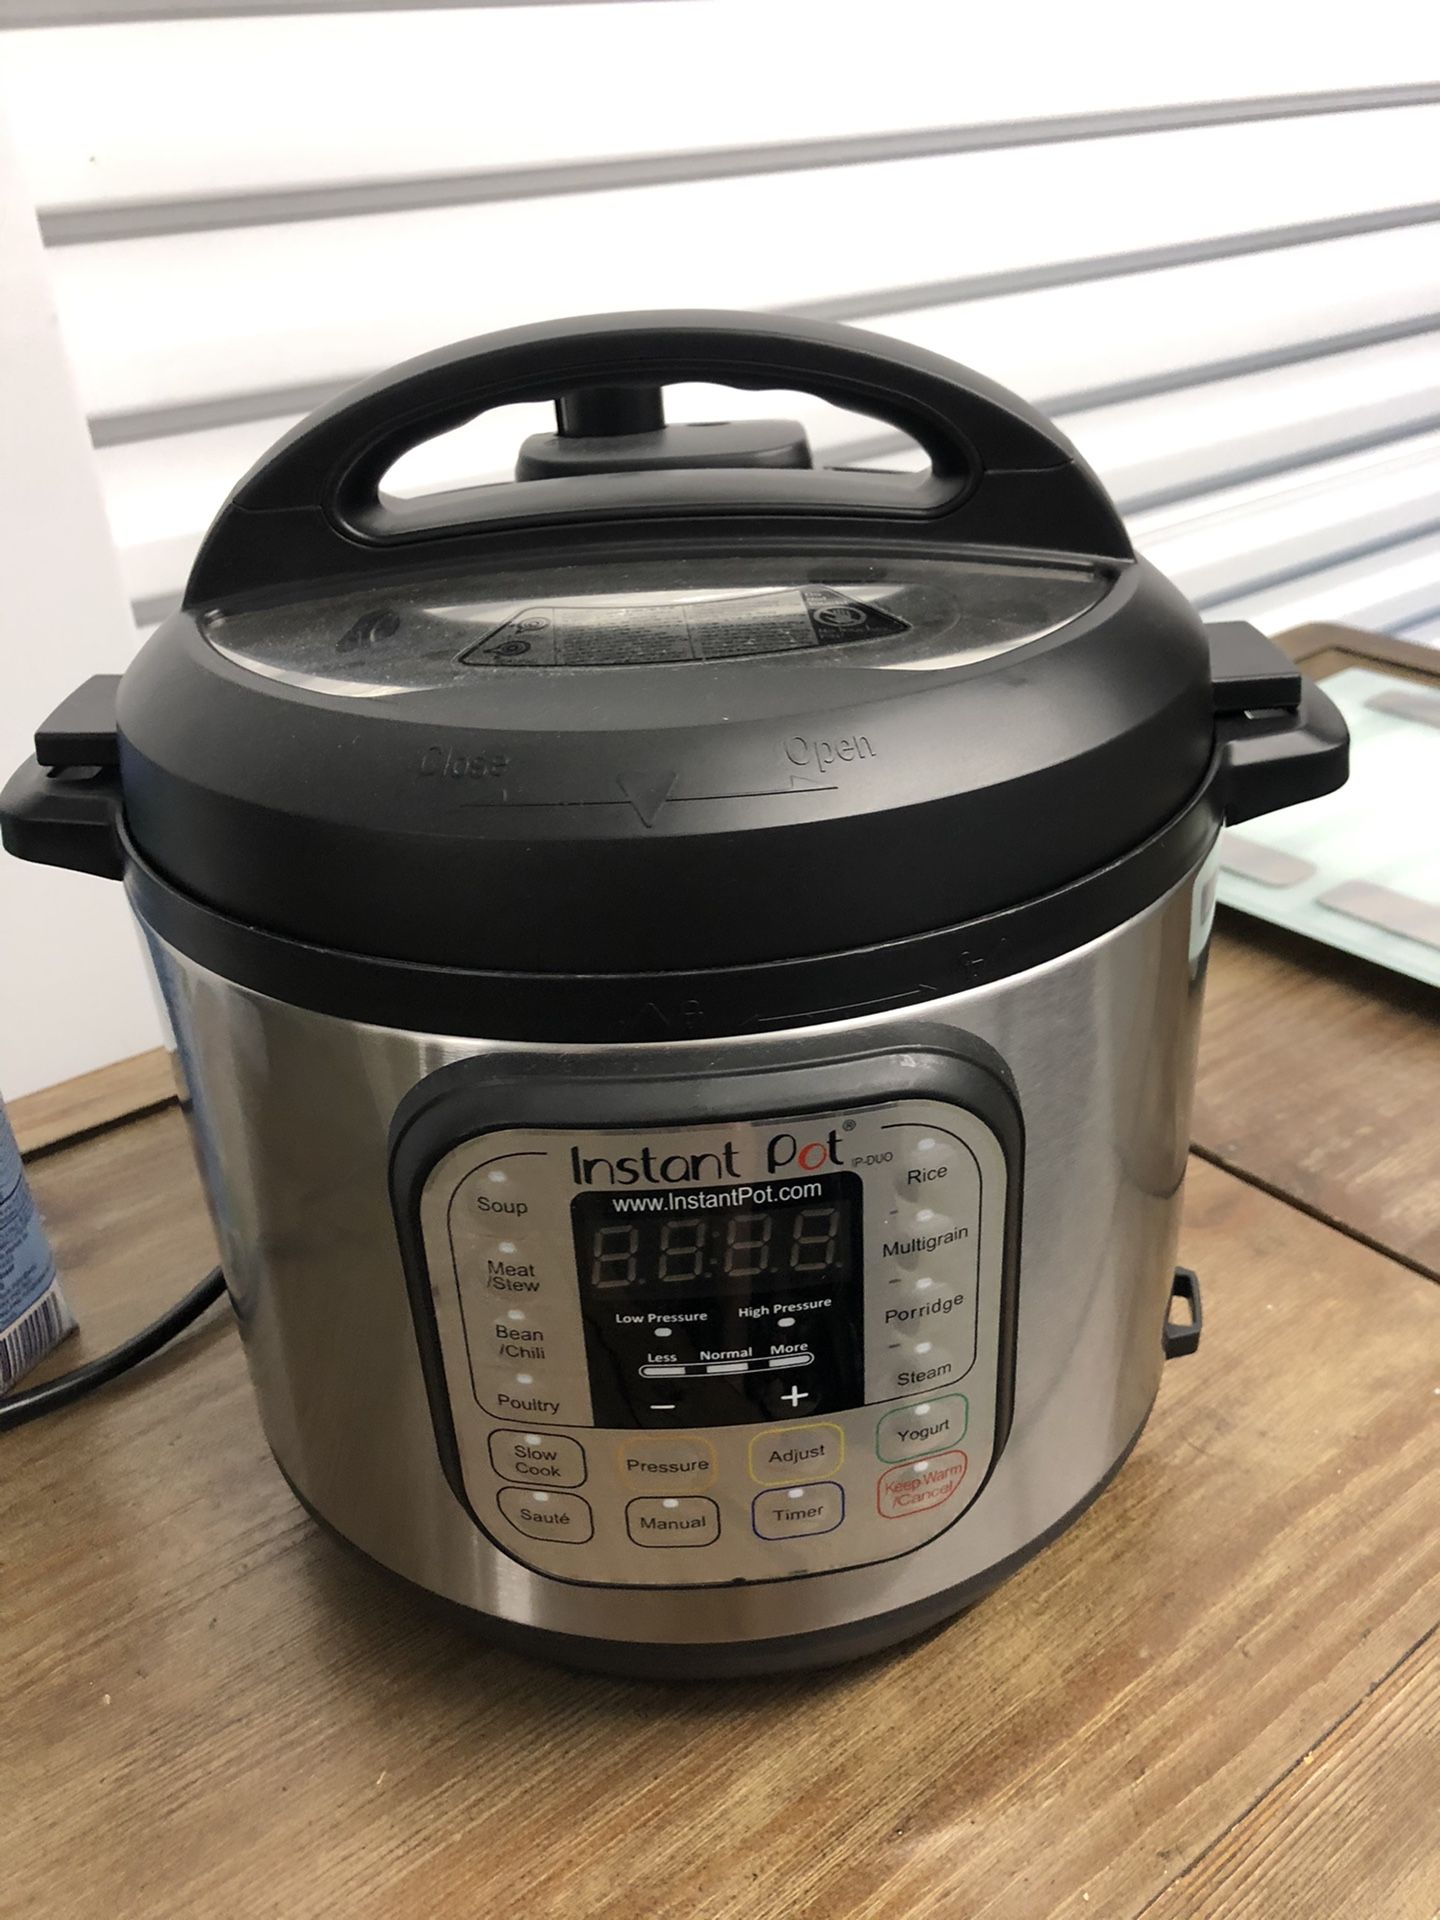 Instant Pot - 7-in-1 Multi-functional Electric Pressure Cooker